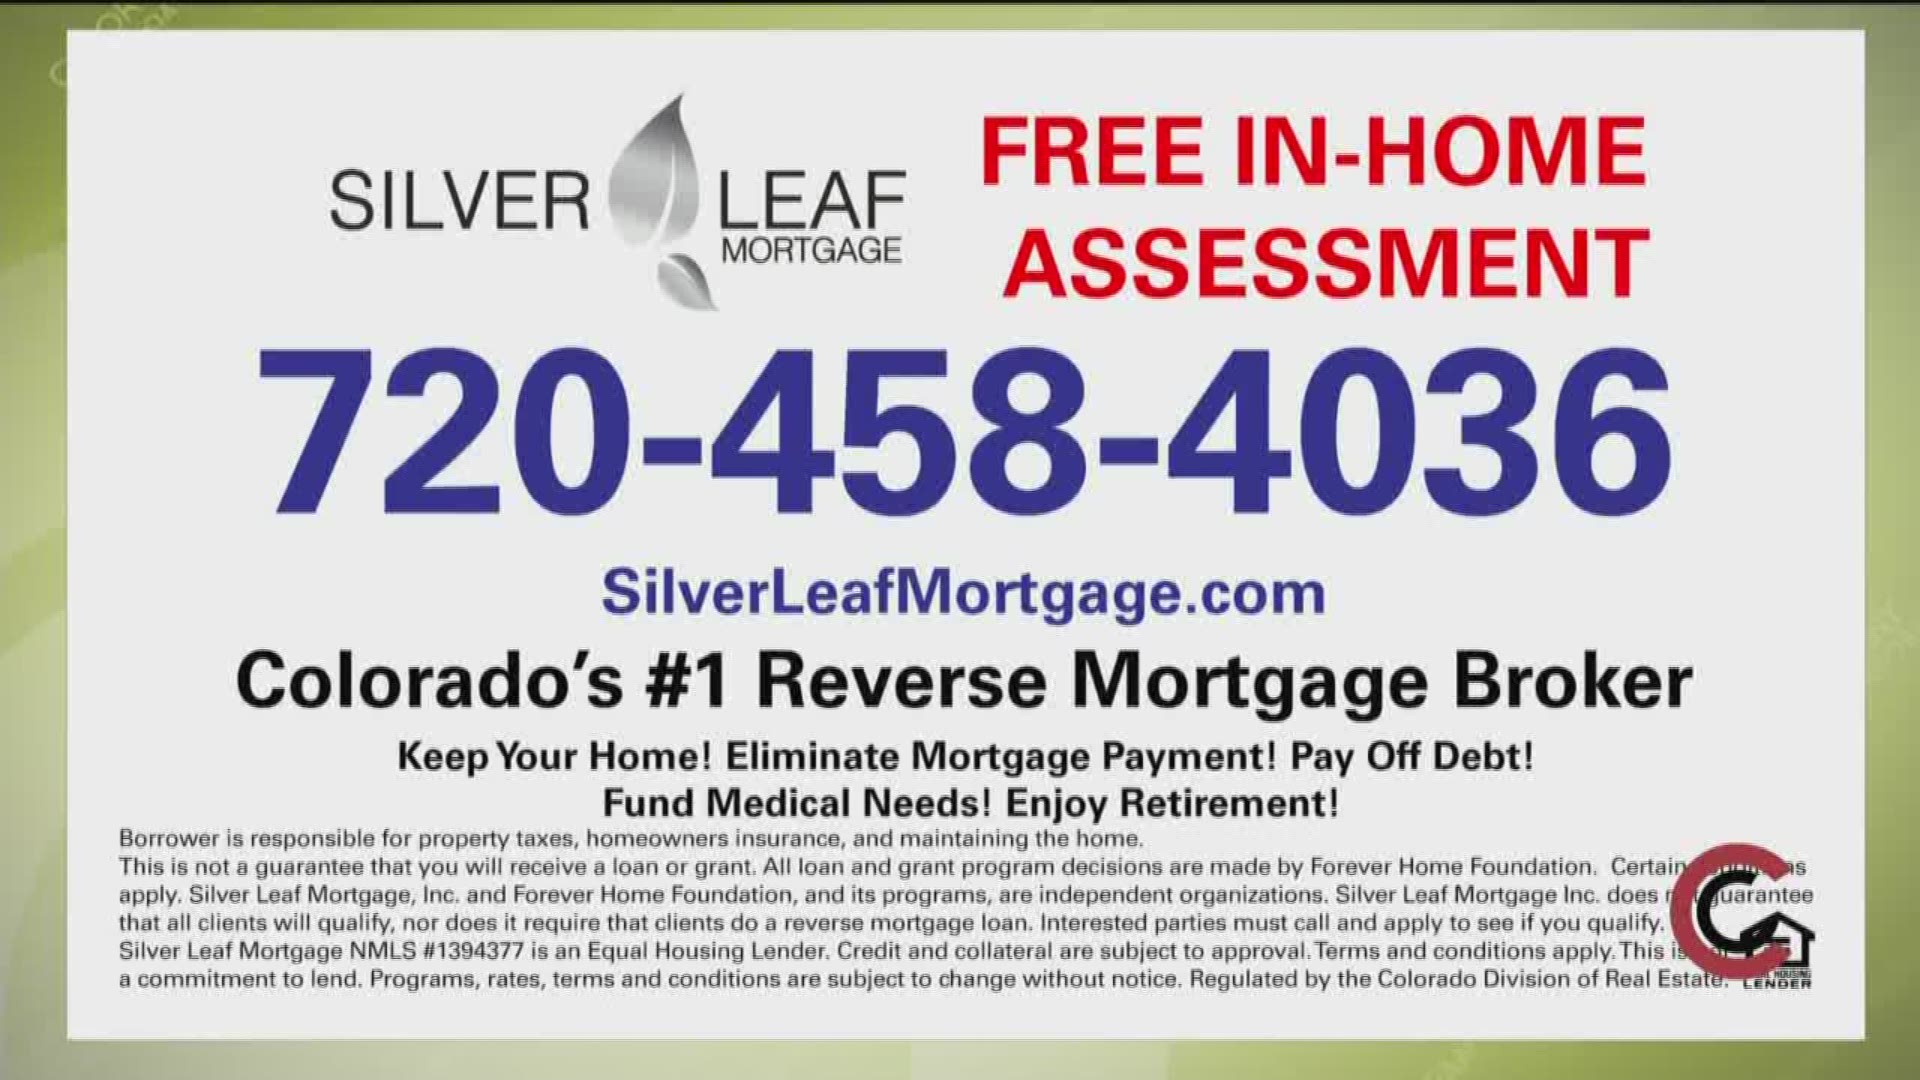 Call Silver Leaf to see if a reverse mortgage is right for you. 720.458.4036--or visit SilverLeafMortgage.com to get started today.